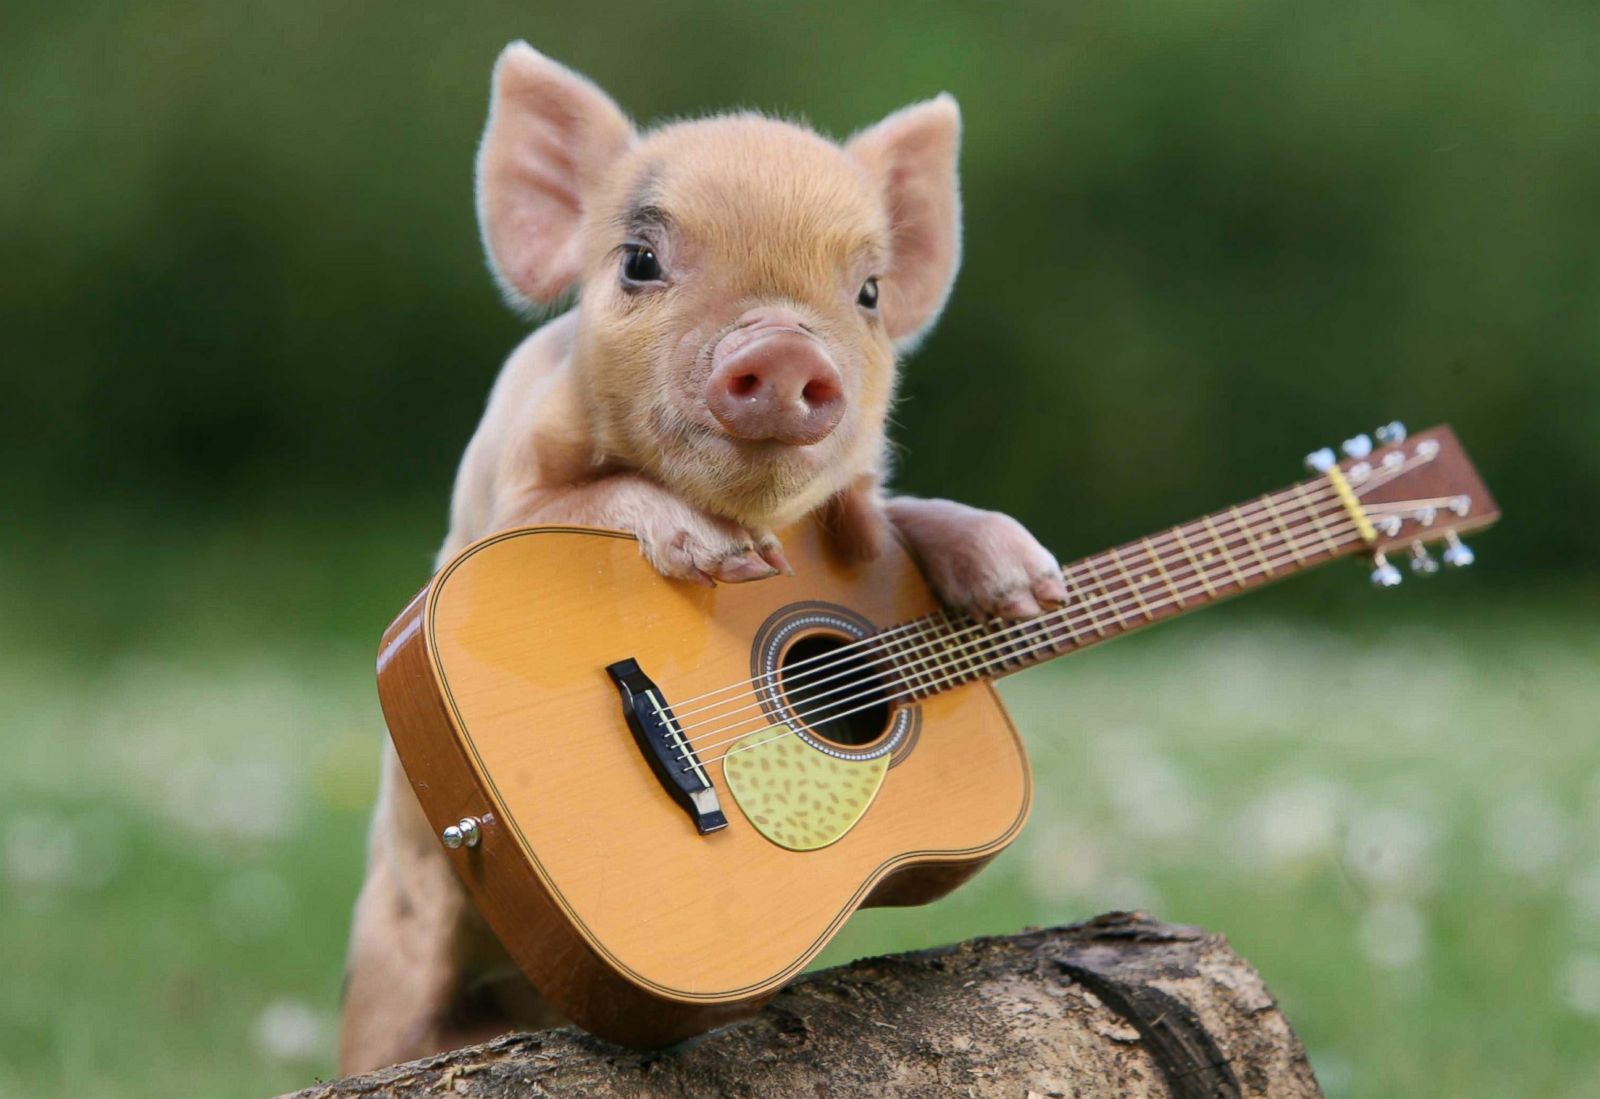 Most Adorable Micro Pig Photo Ever! Photo